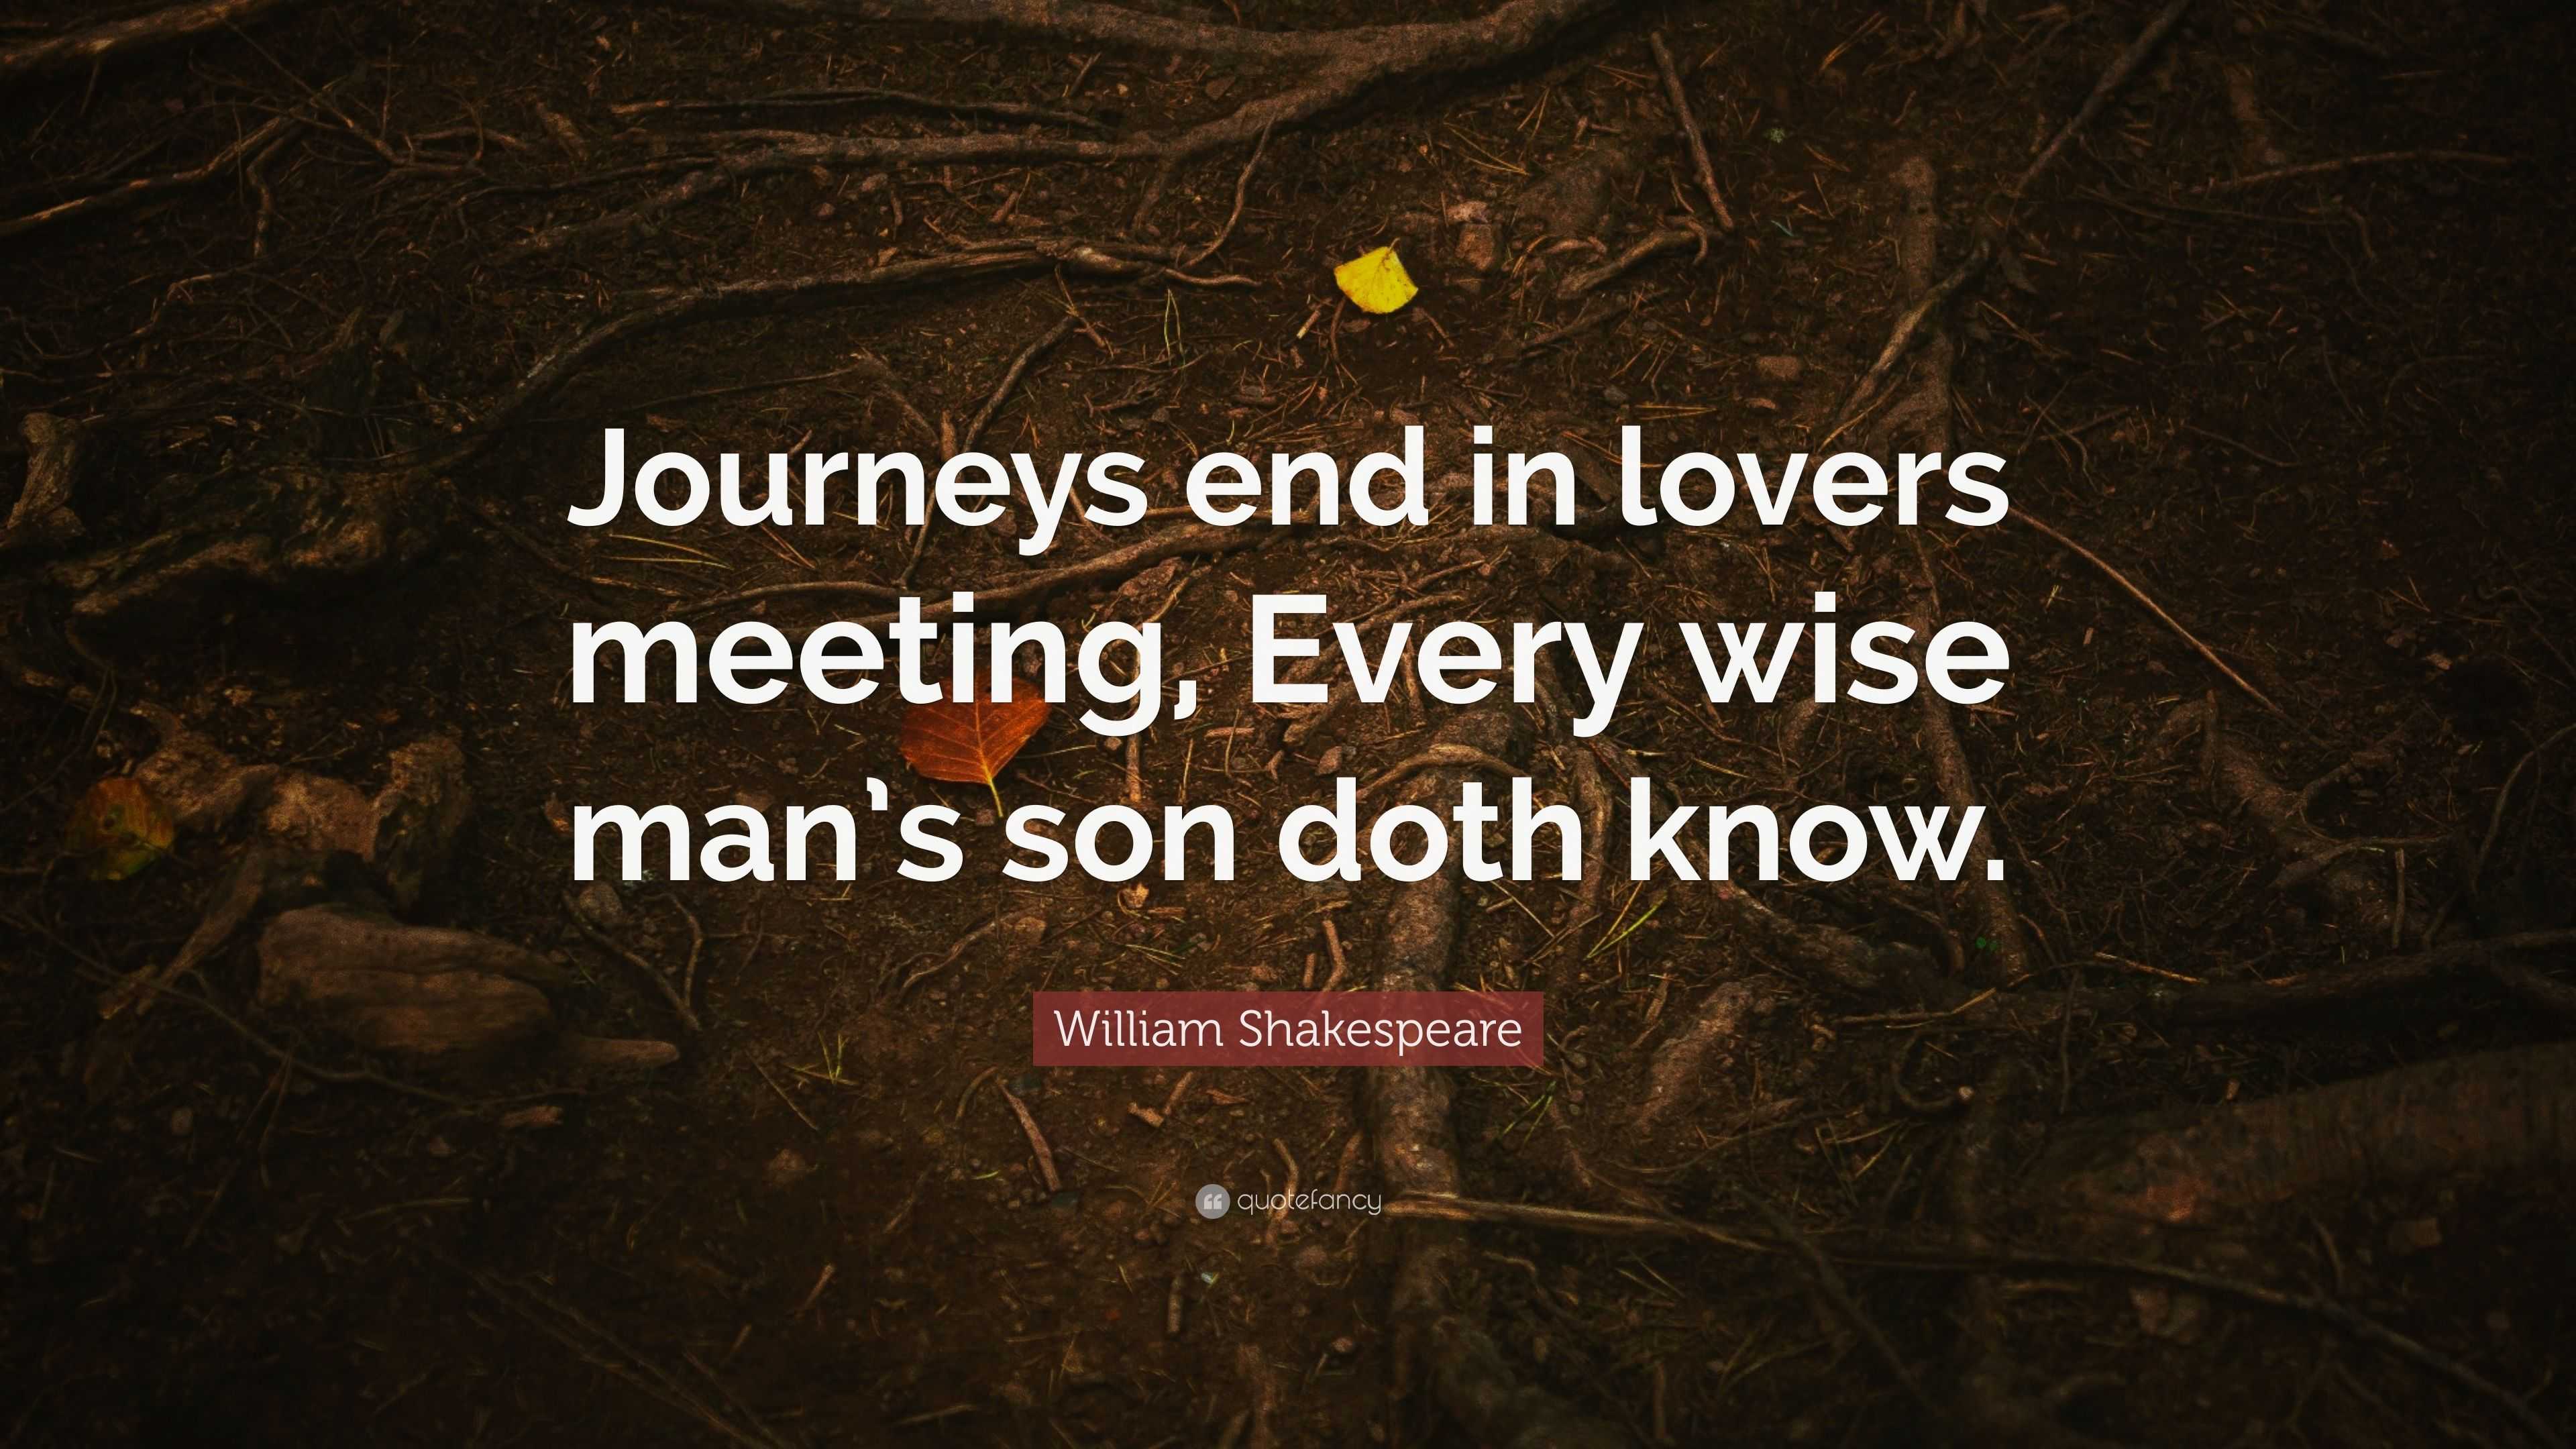 journey ends in lovers meeting